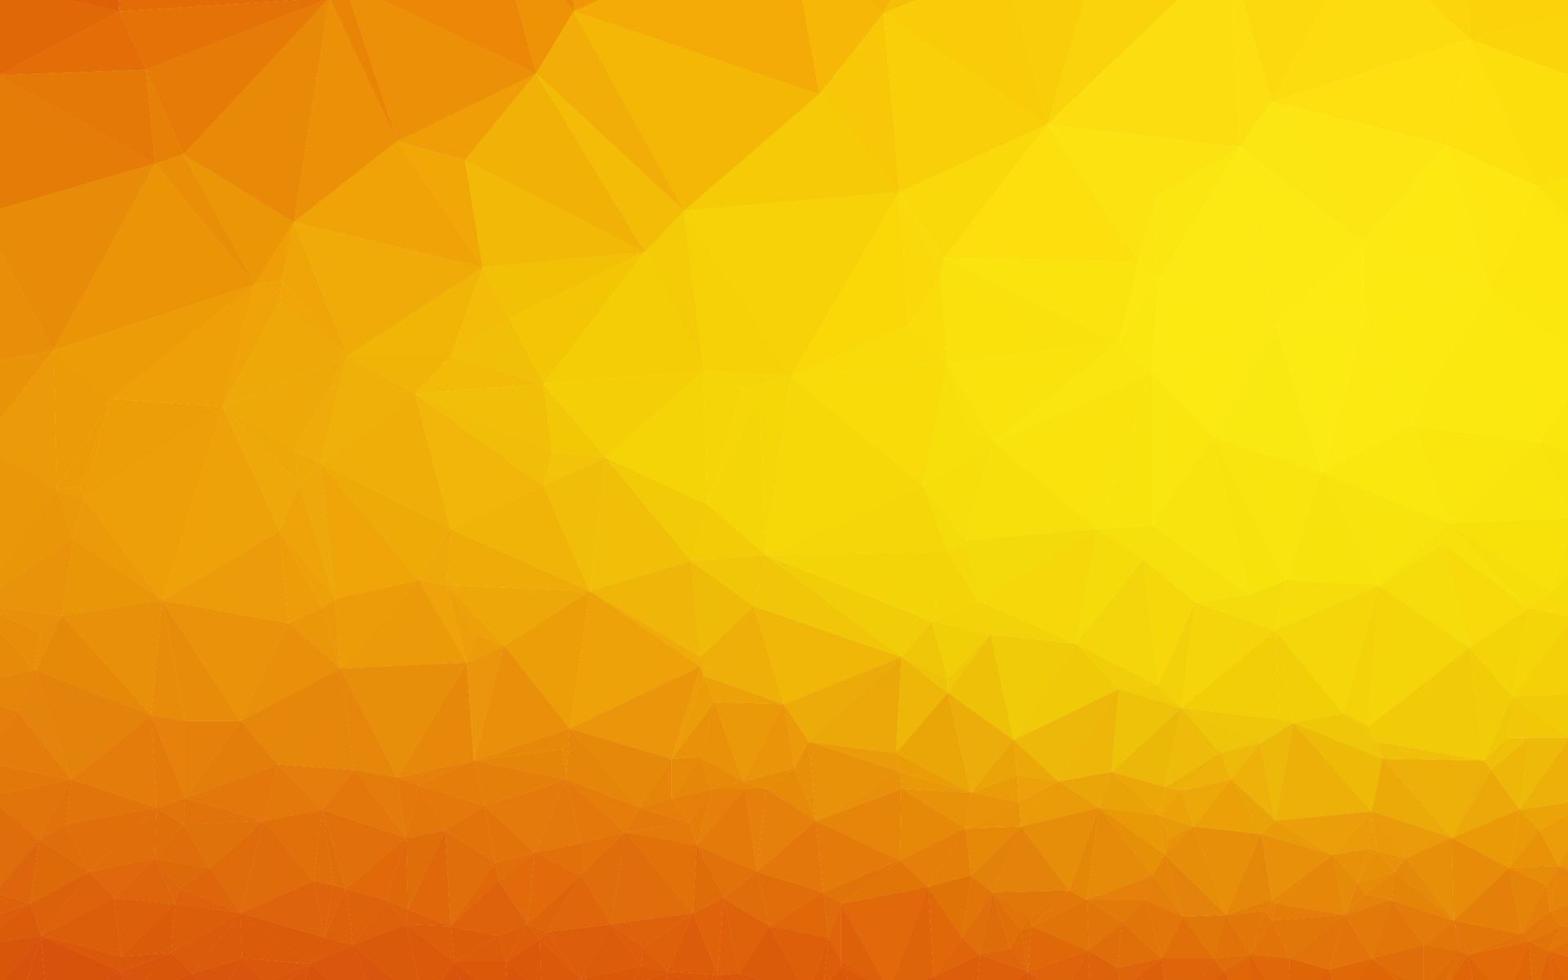 Light Orange vector polygon abstract background.